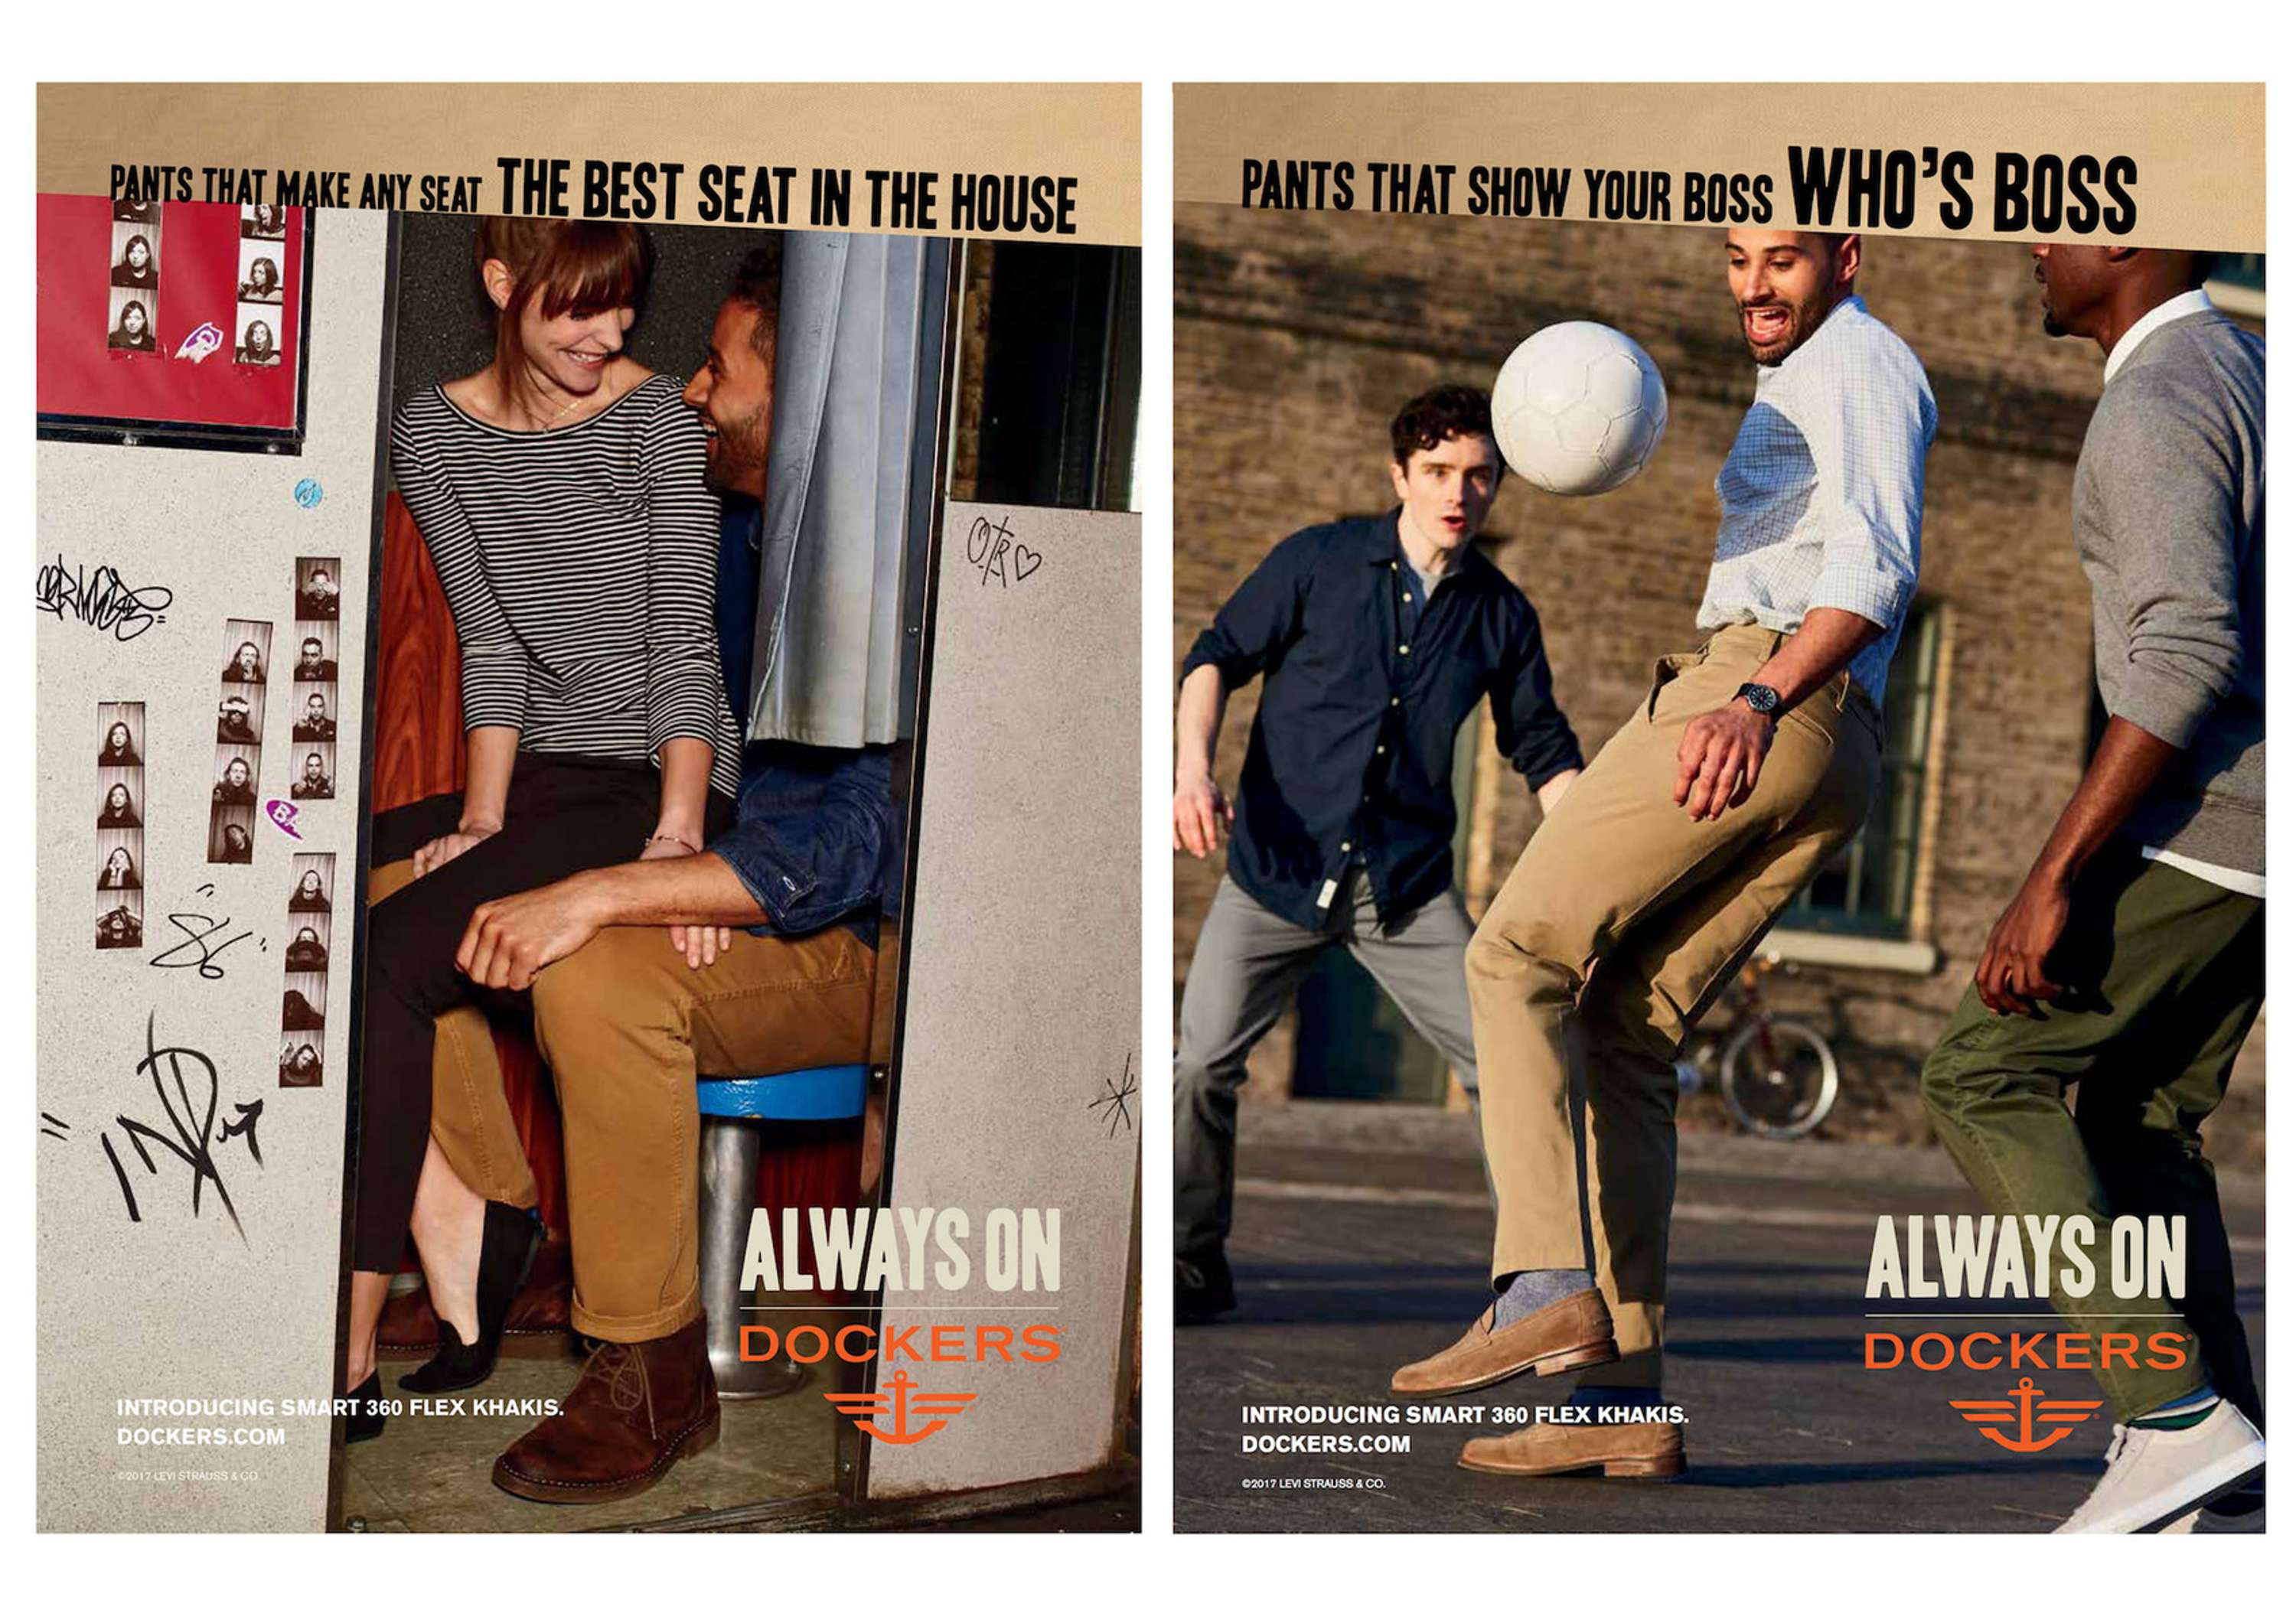 DOCKERS / Levi Strauss (Always On Campaign) | The Dots